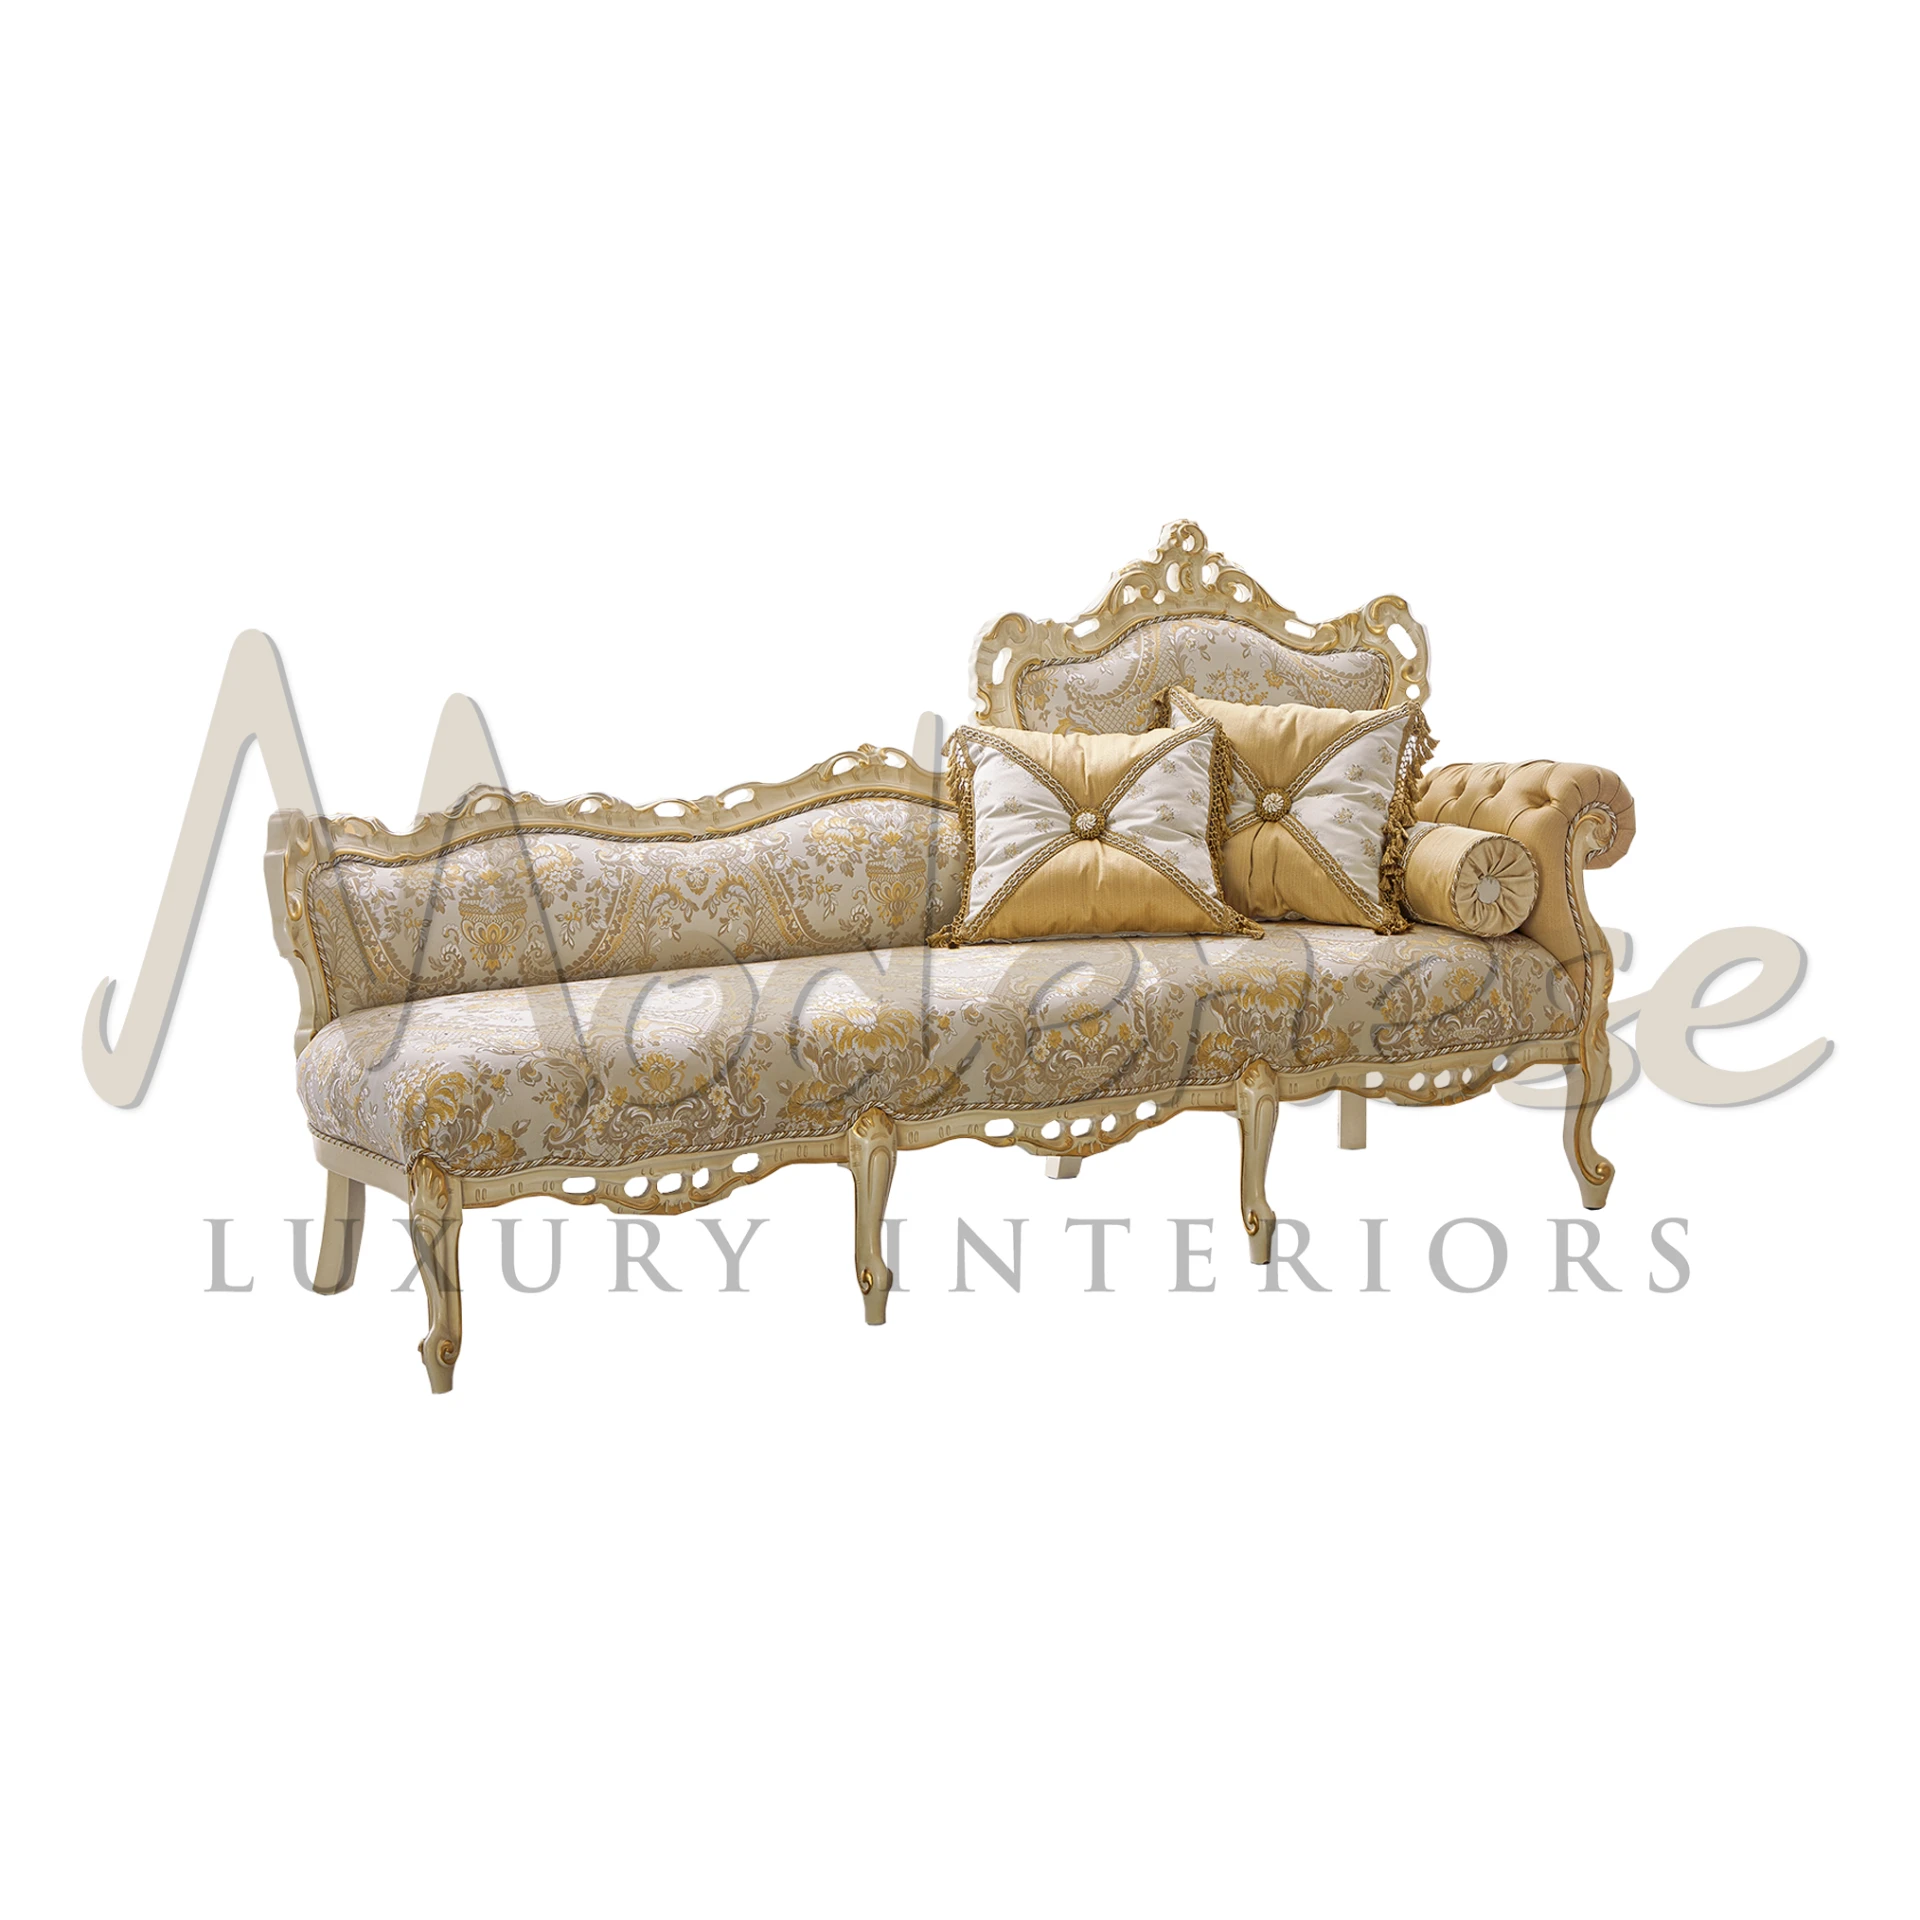 Rococo-style golden bench with elaborate damask fabric and decorative cushions.                                                                       